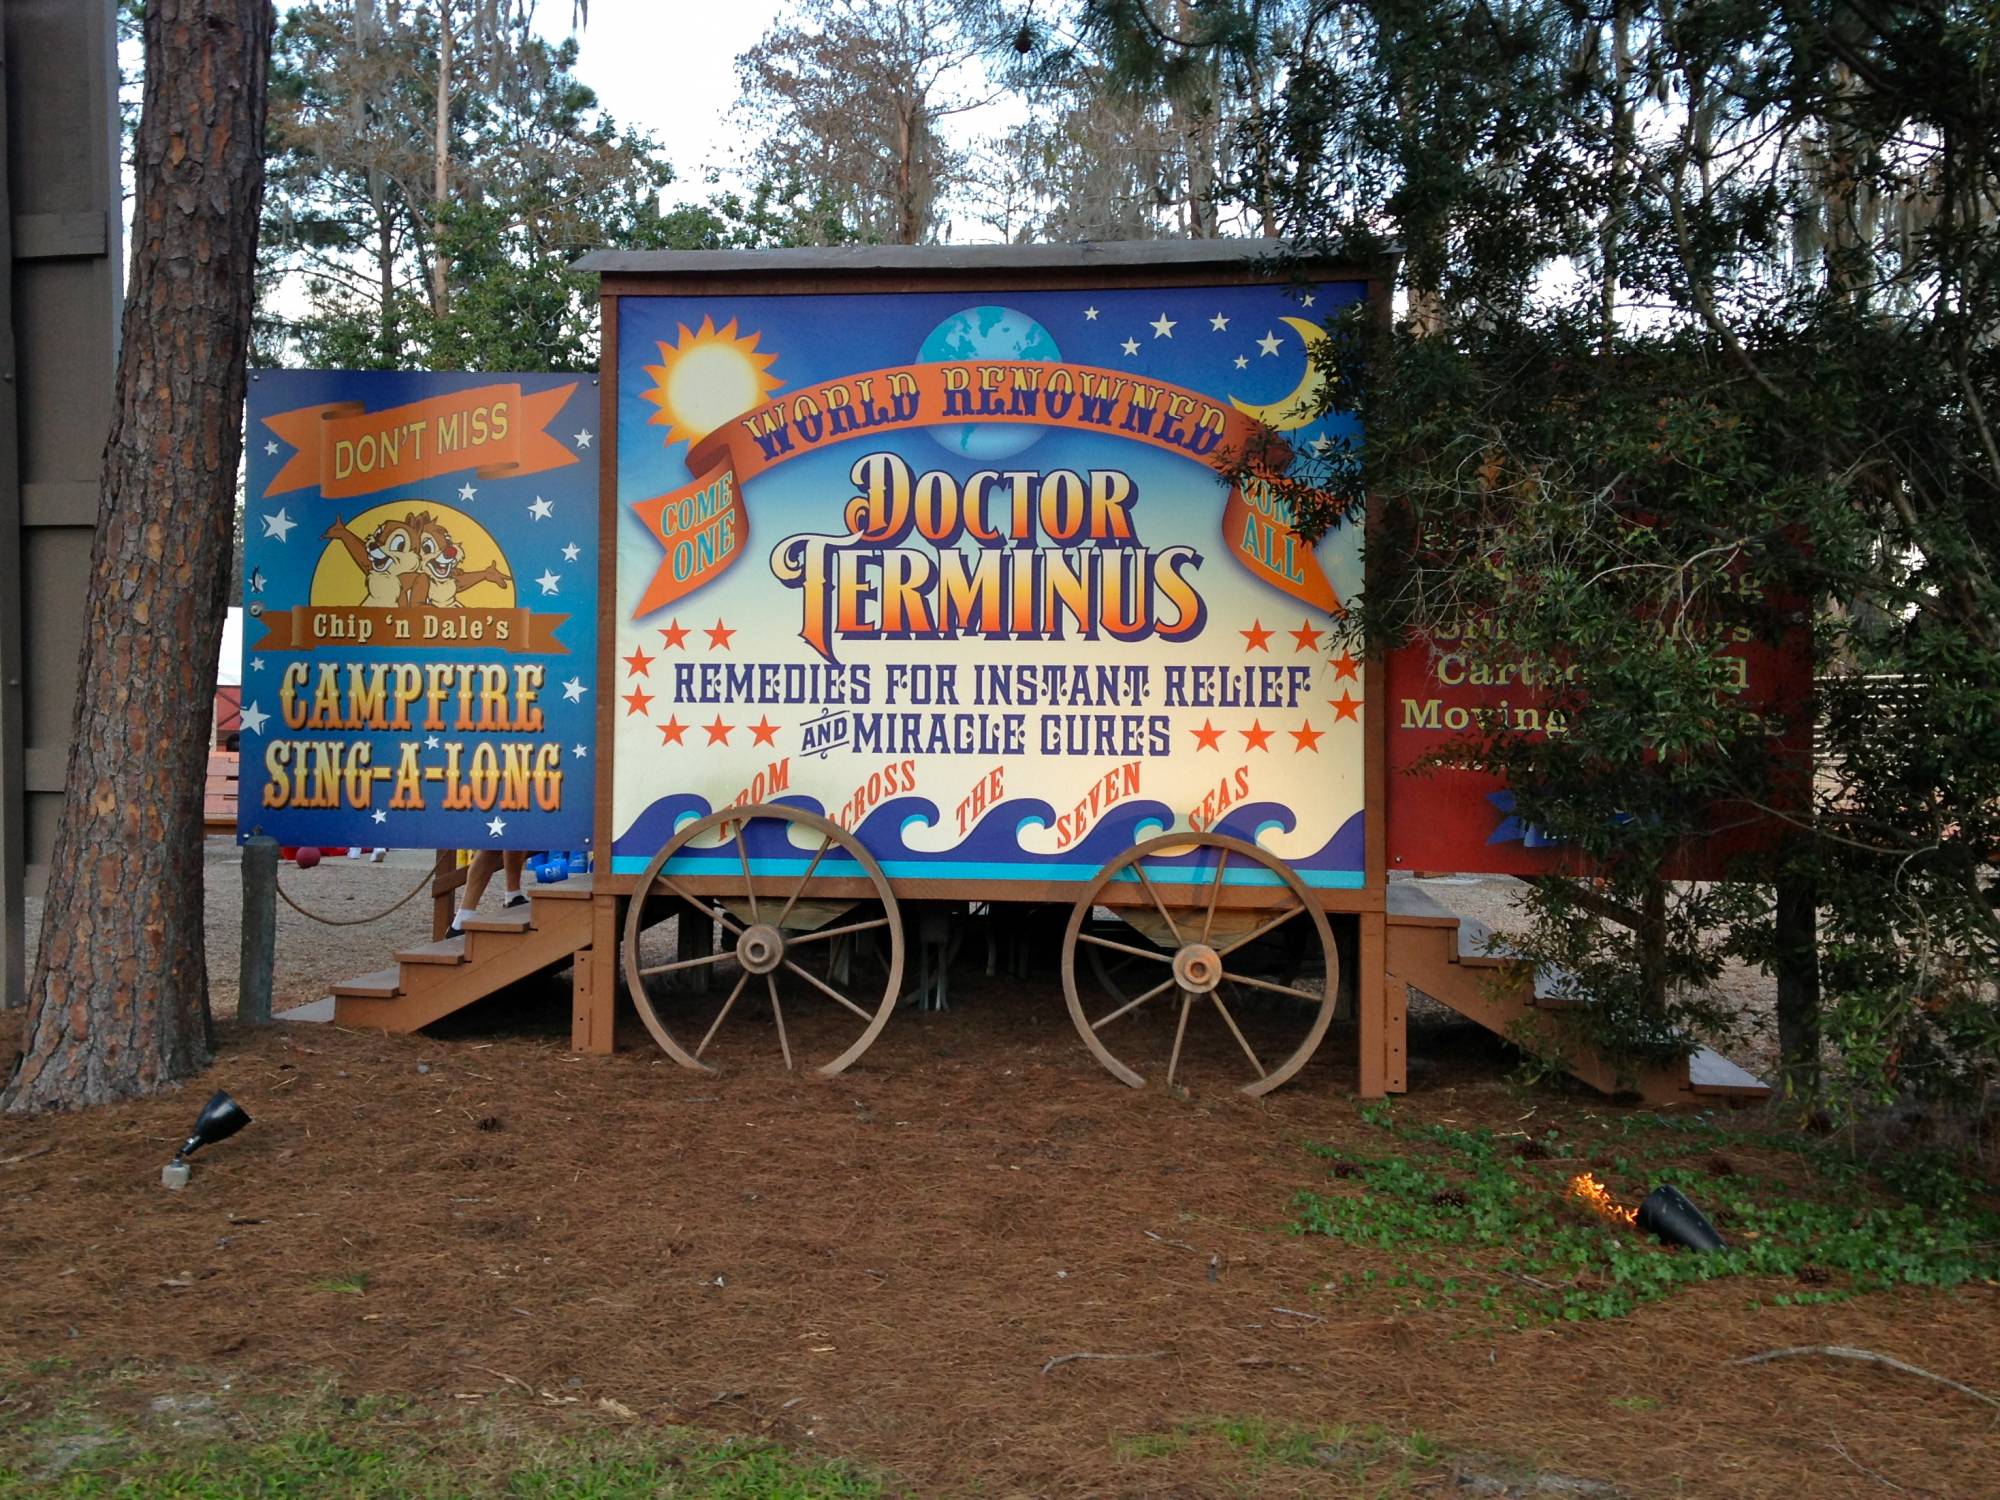 Chip 'n Dale's Campfire Sing-a-long at Fort Wilderness